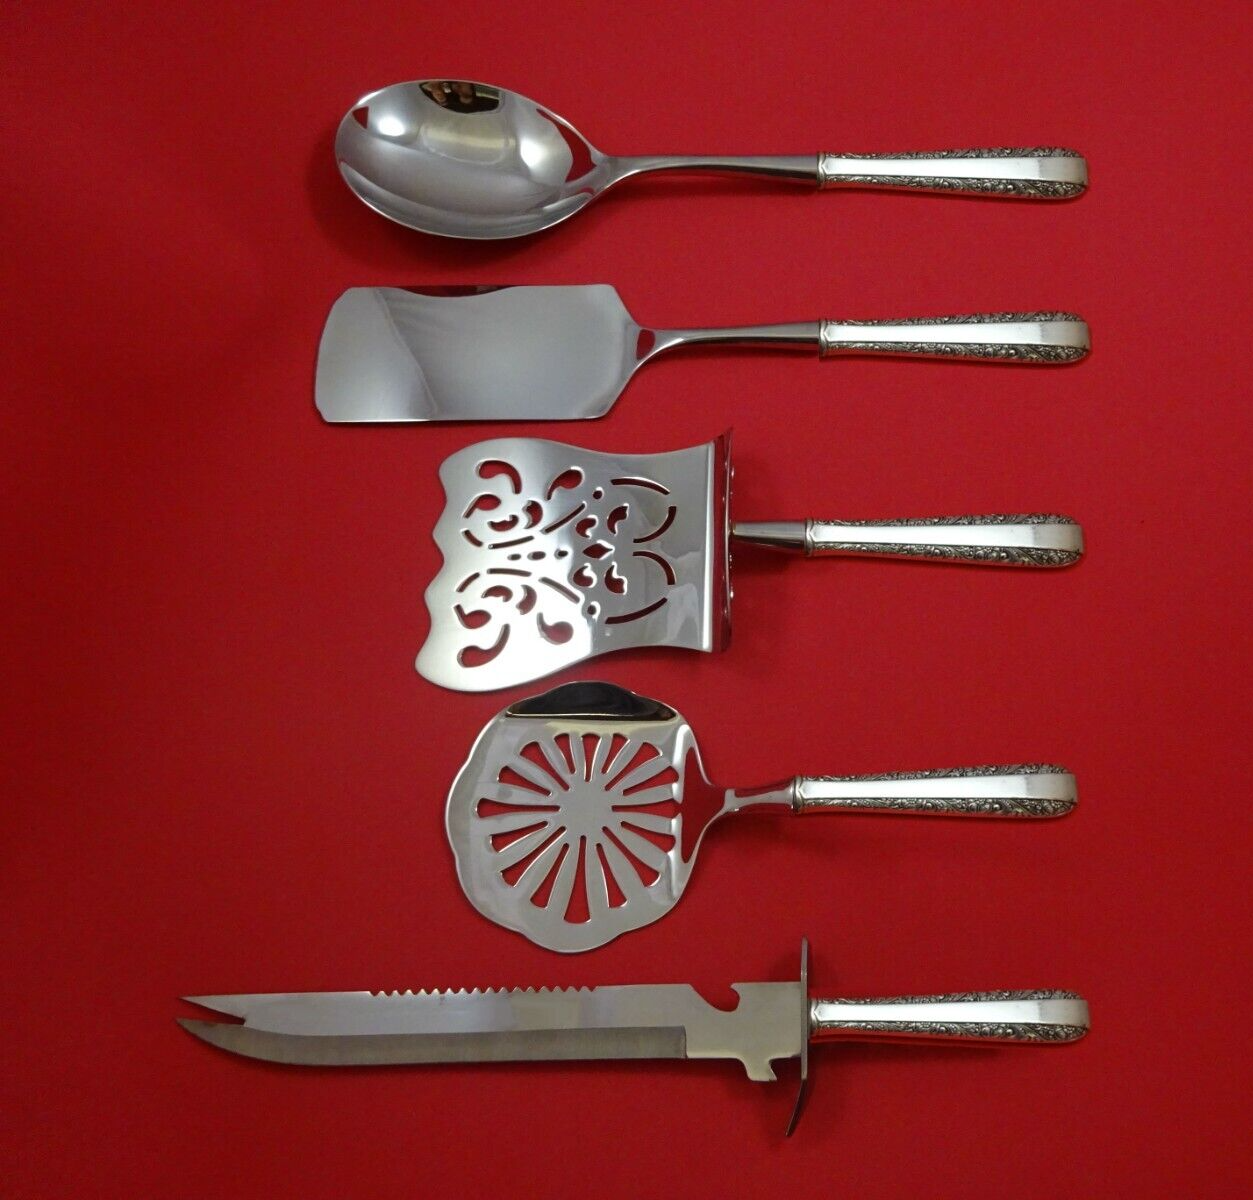 Primary image for Candlelight by Towle Sterling Silver Brunch Serving Set 5pc HH WS Custom Made